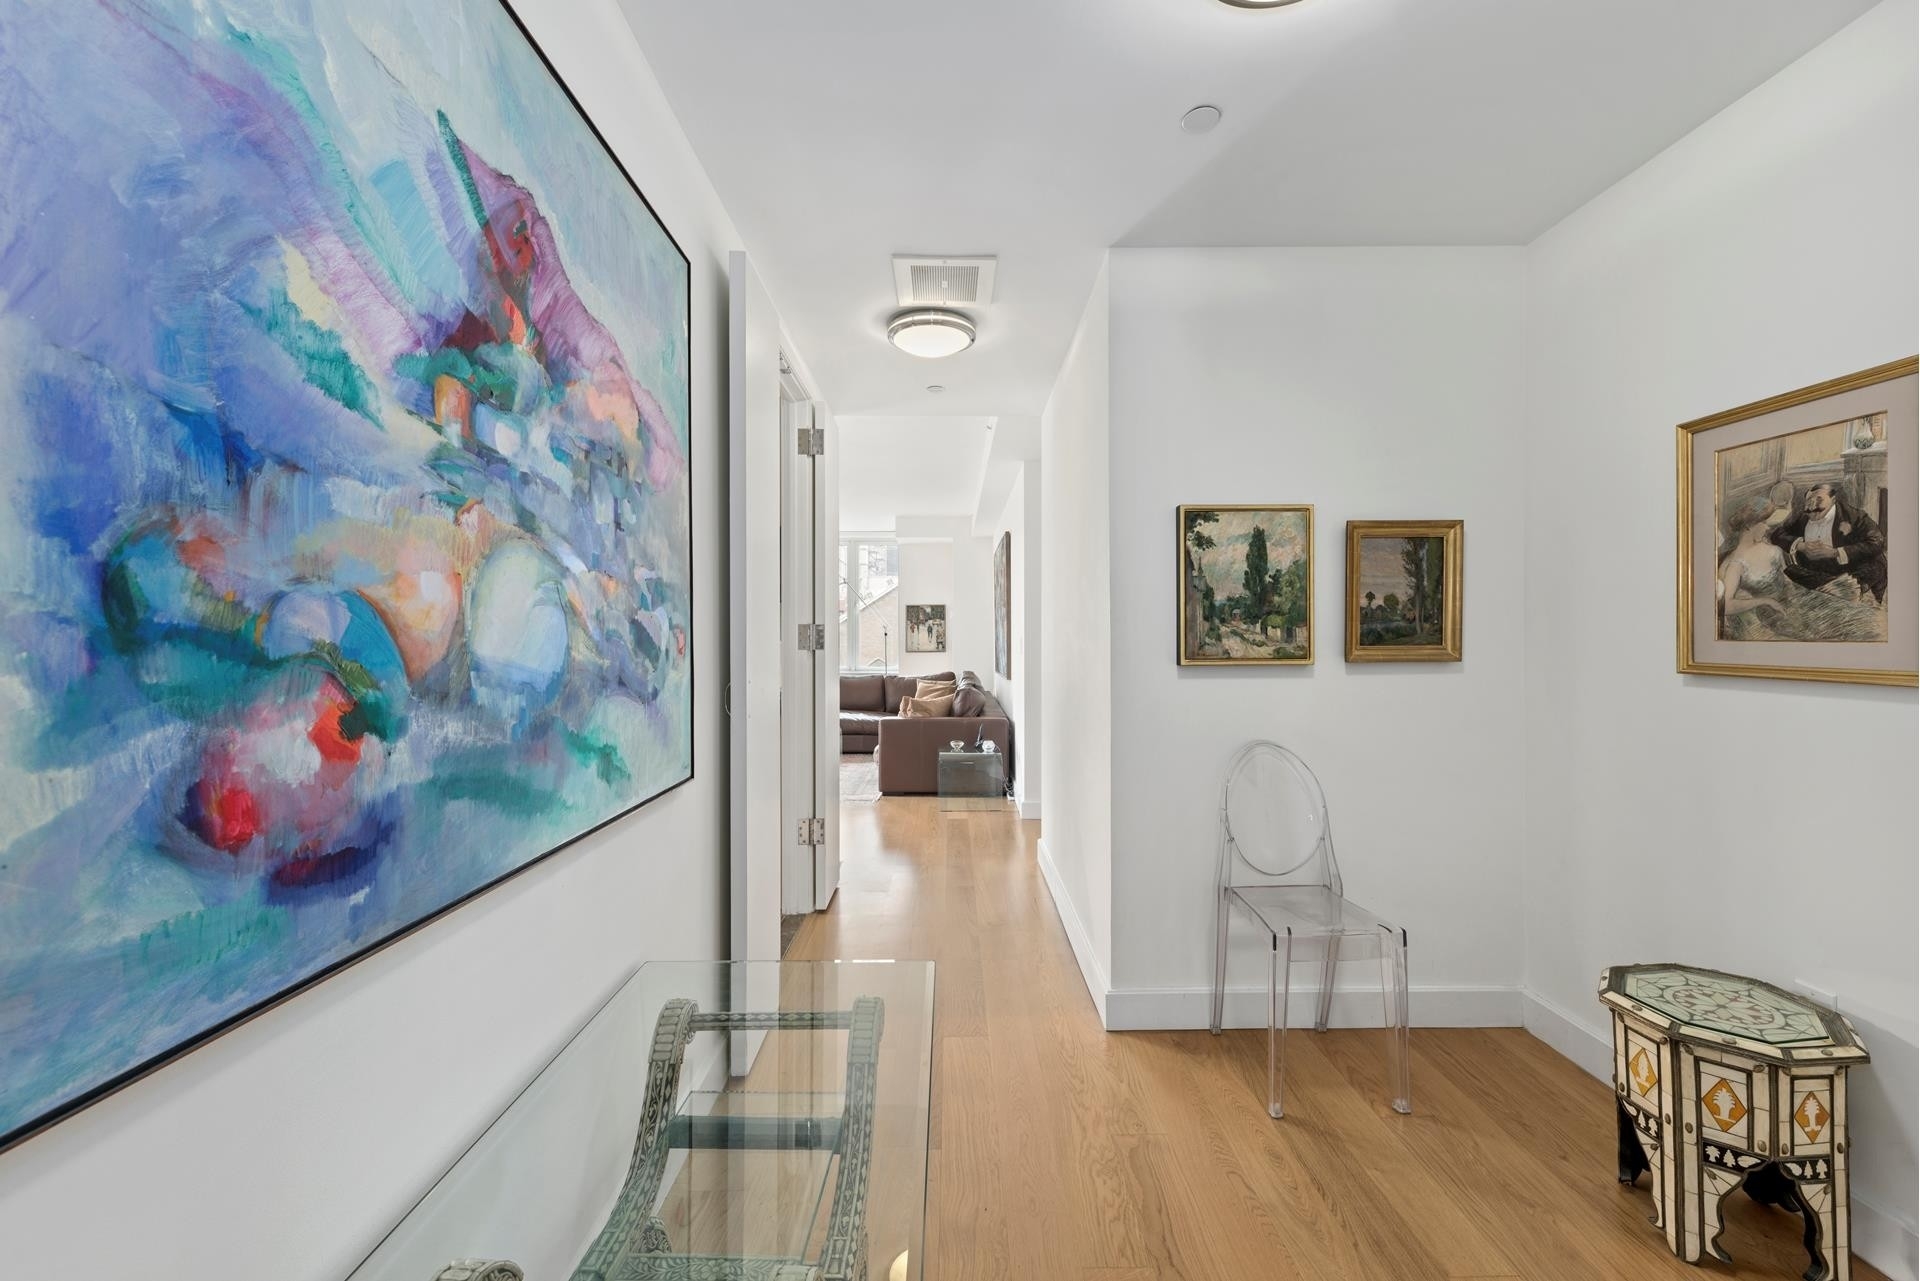 Condominium for Sale at Arcadia, 408 E 79TH ST, 5A Upper East Side, New York, NY 10075